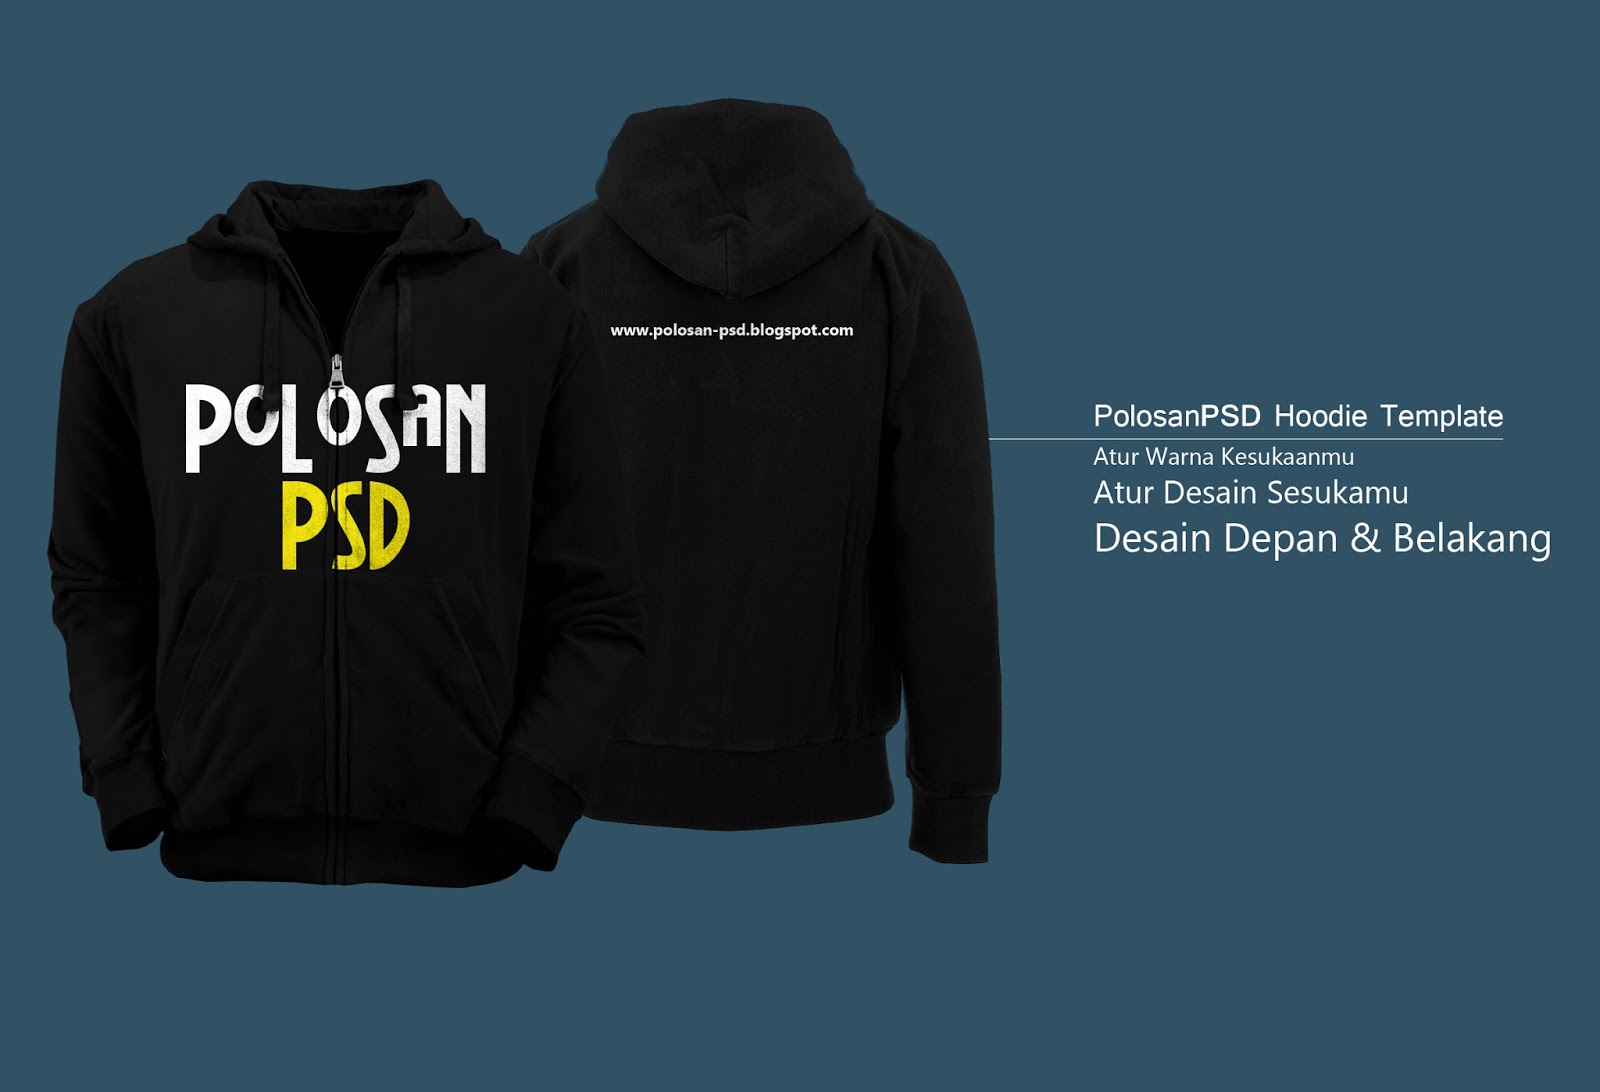 Download PSD Hoodie/Sweeater Template